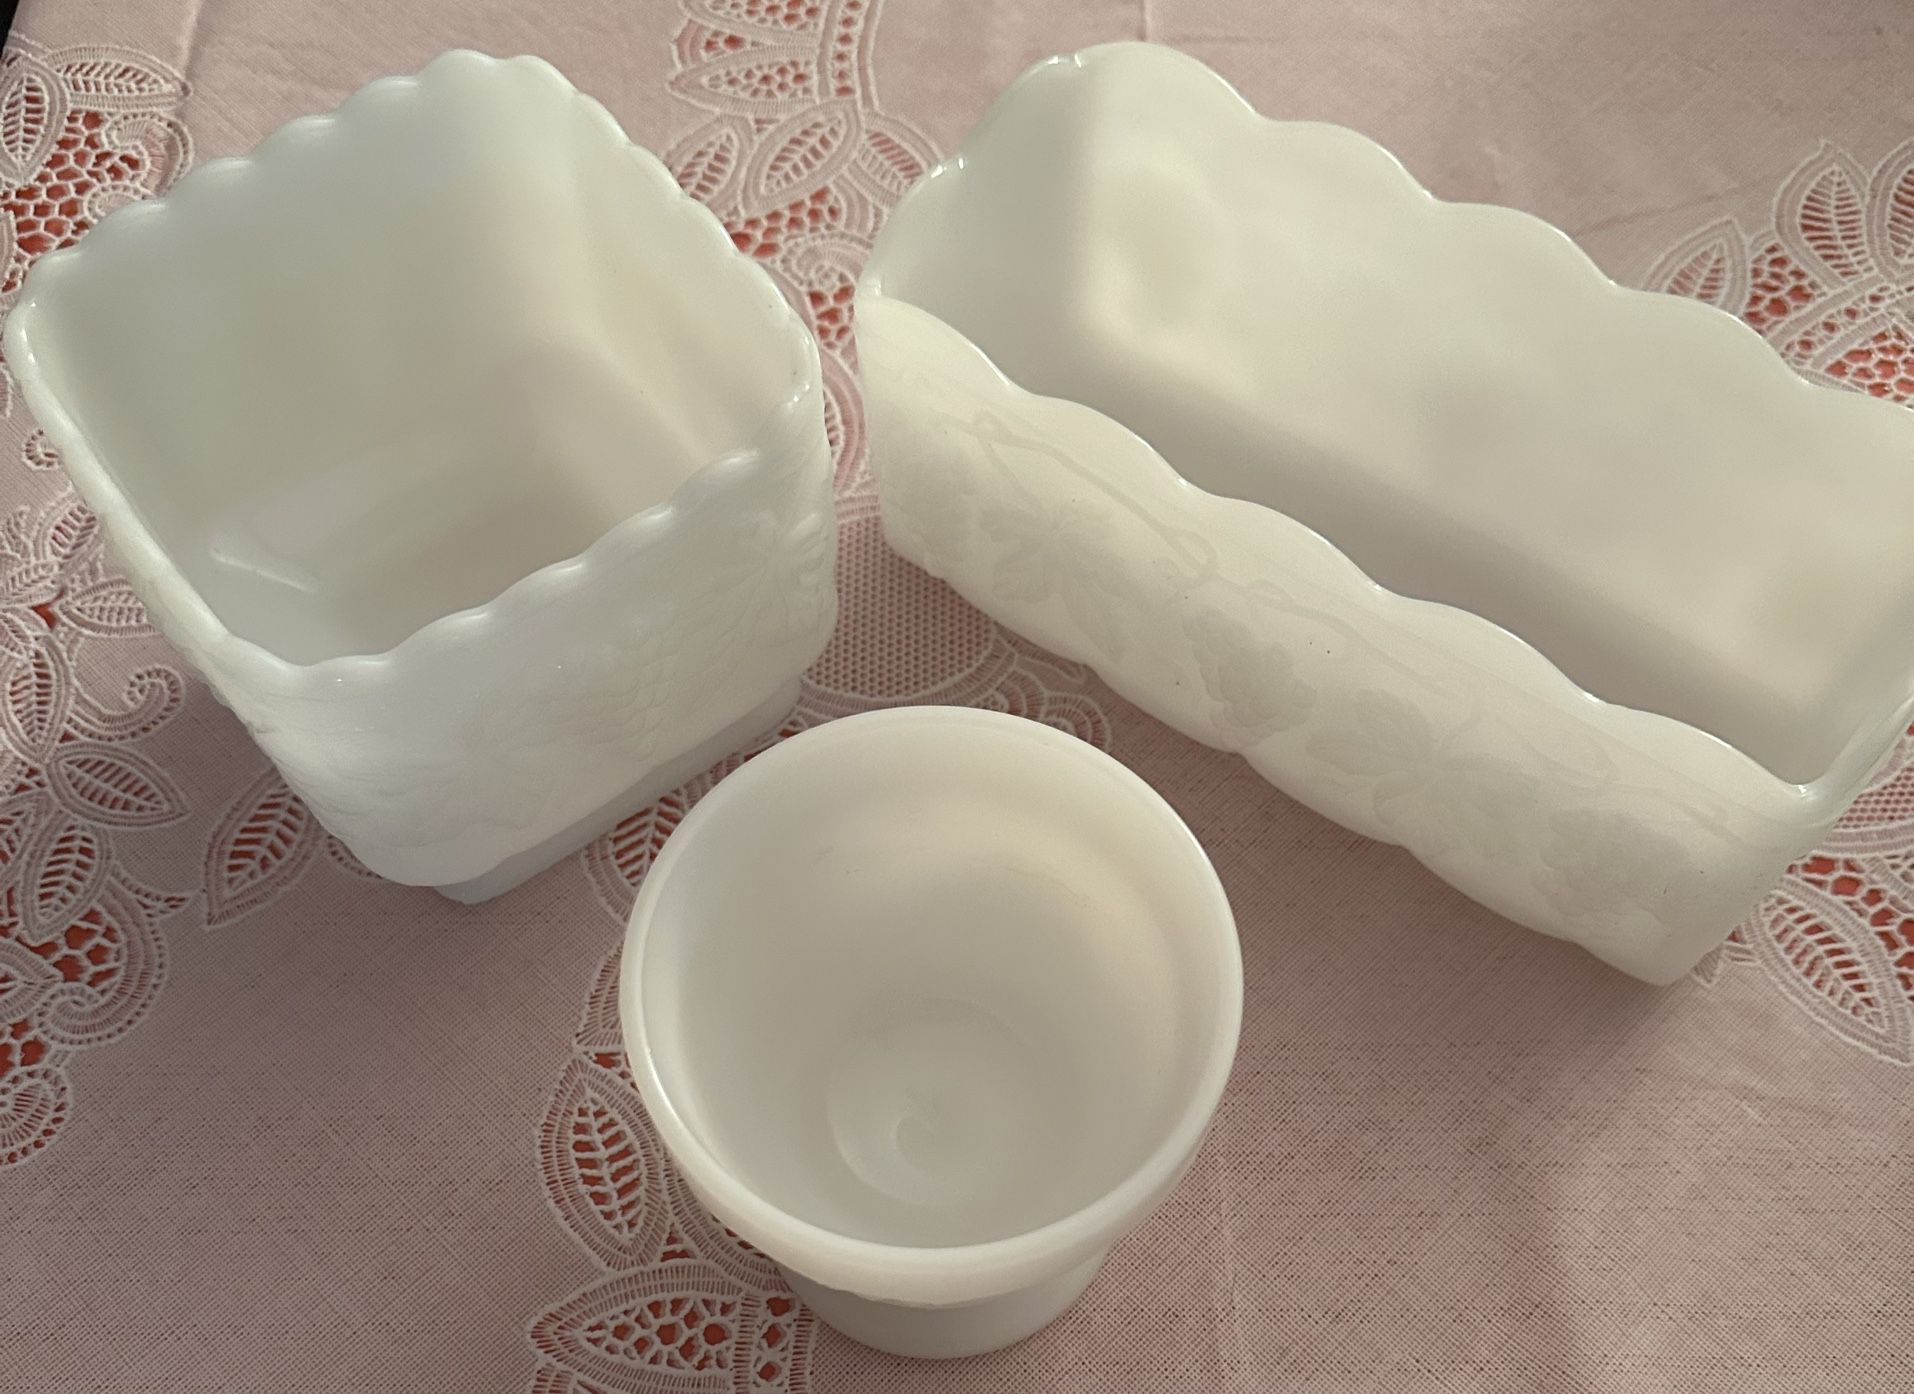 Vintage Milk Glass -3 Pieces . 2 Planters And 1 Sherbet Dish